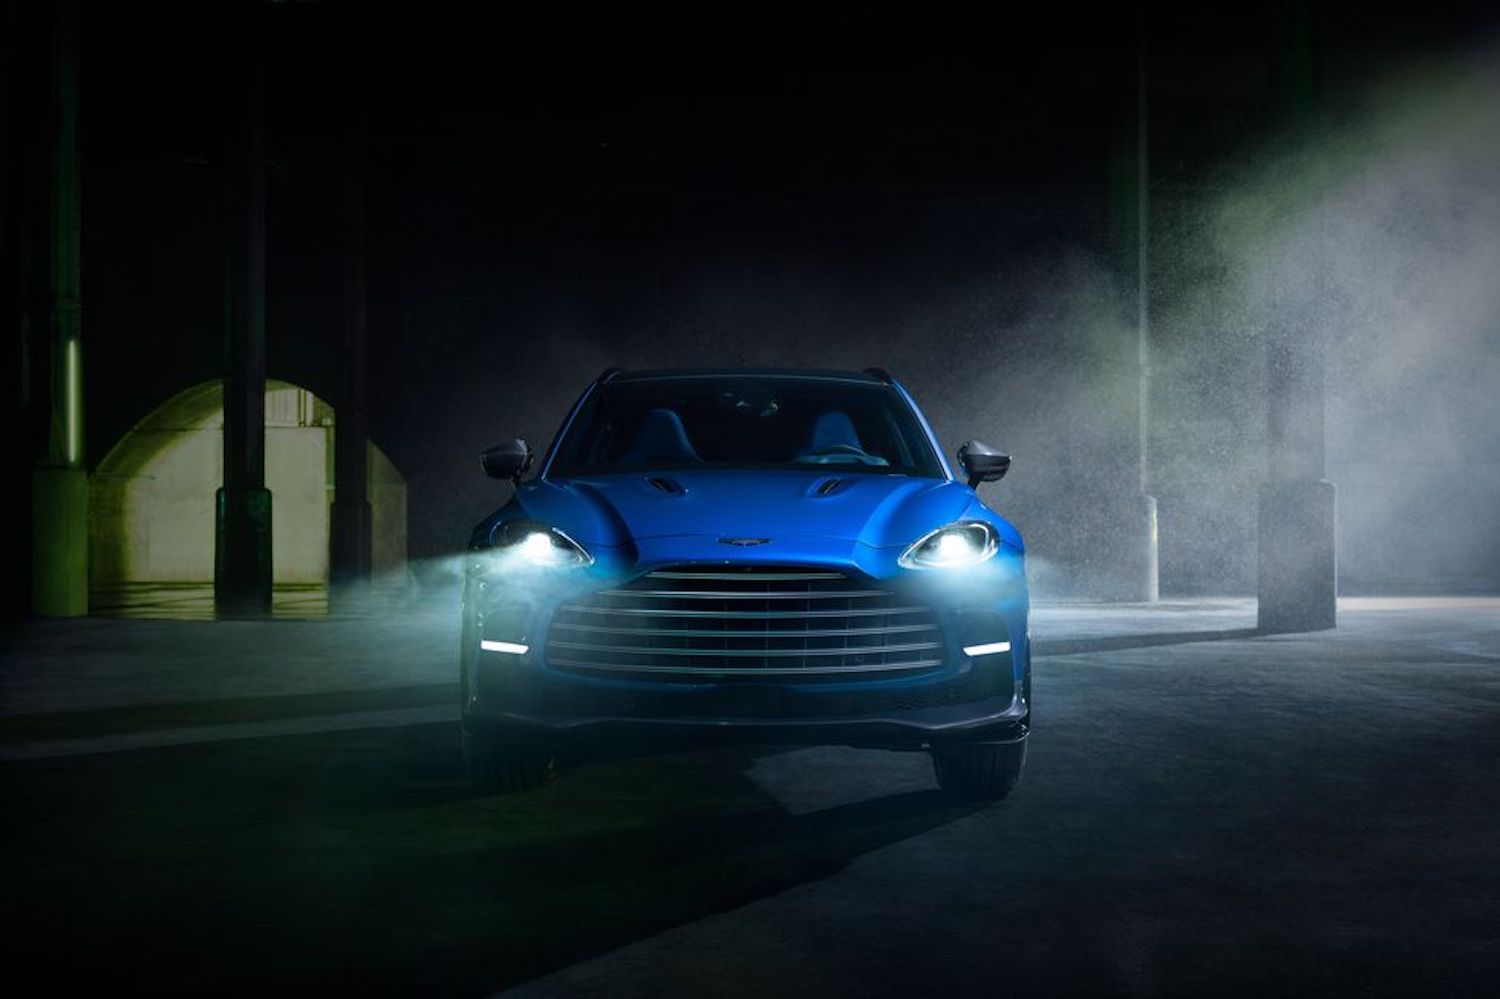 Aston Martin DBX 707 front end with headlights on in a dark warehouse.